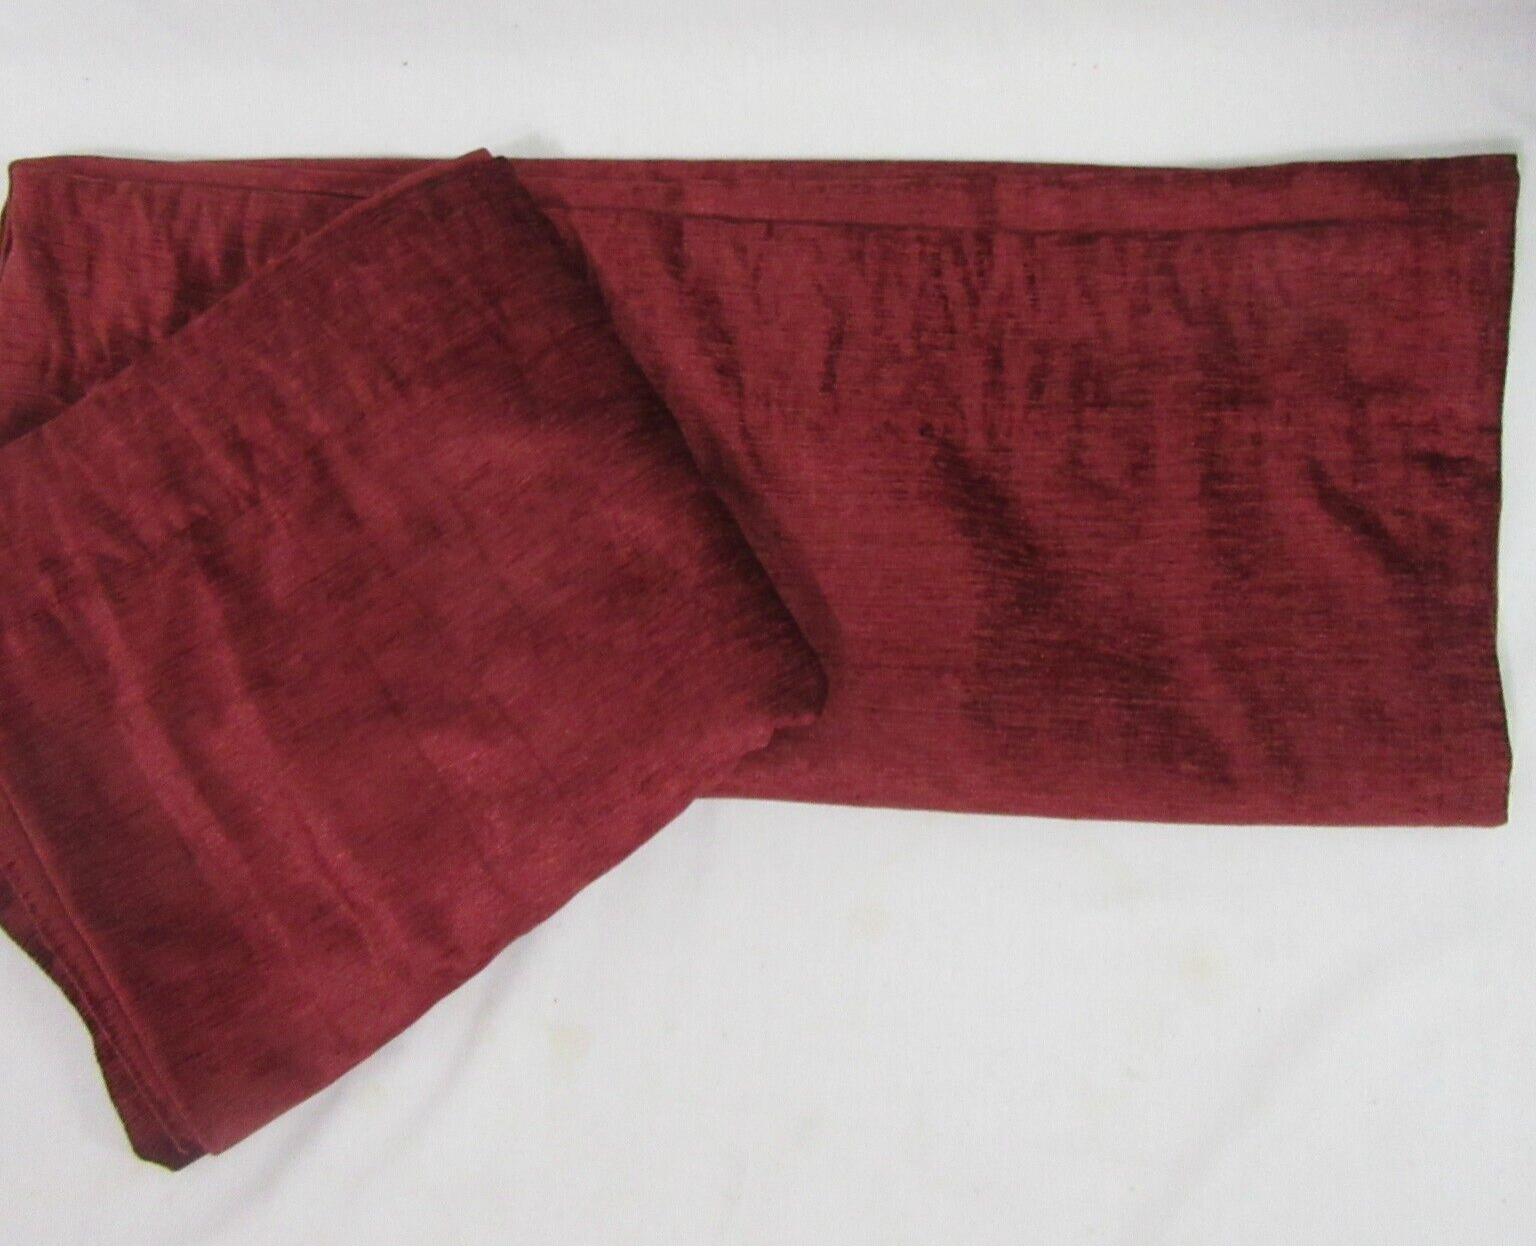 J Queen Solid Red Chenille 2-PC Rod Pocket Drapery Panel Set - $78.00